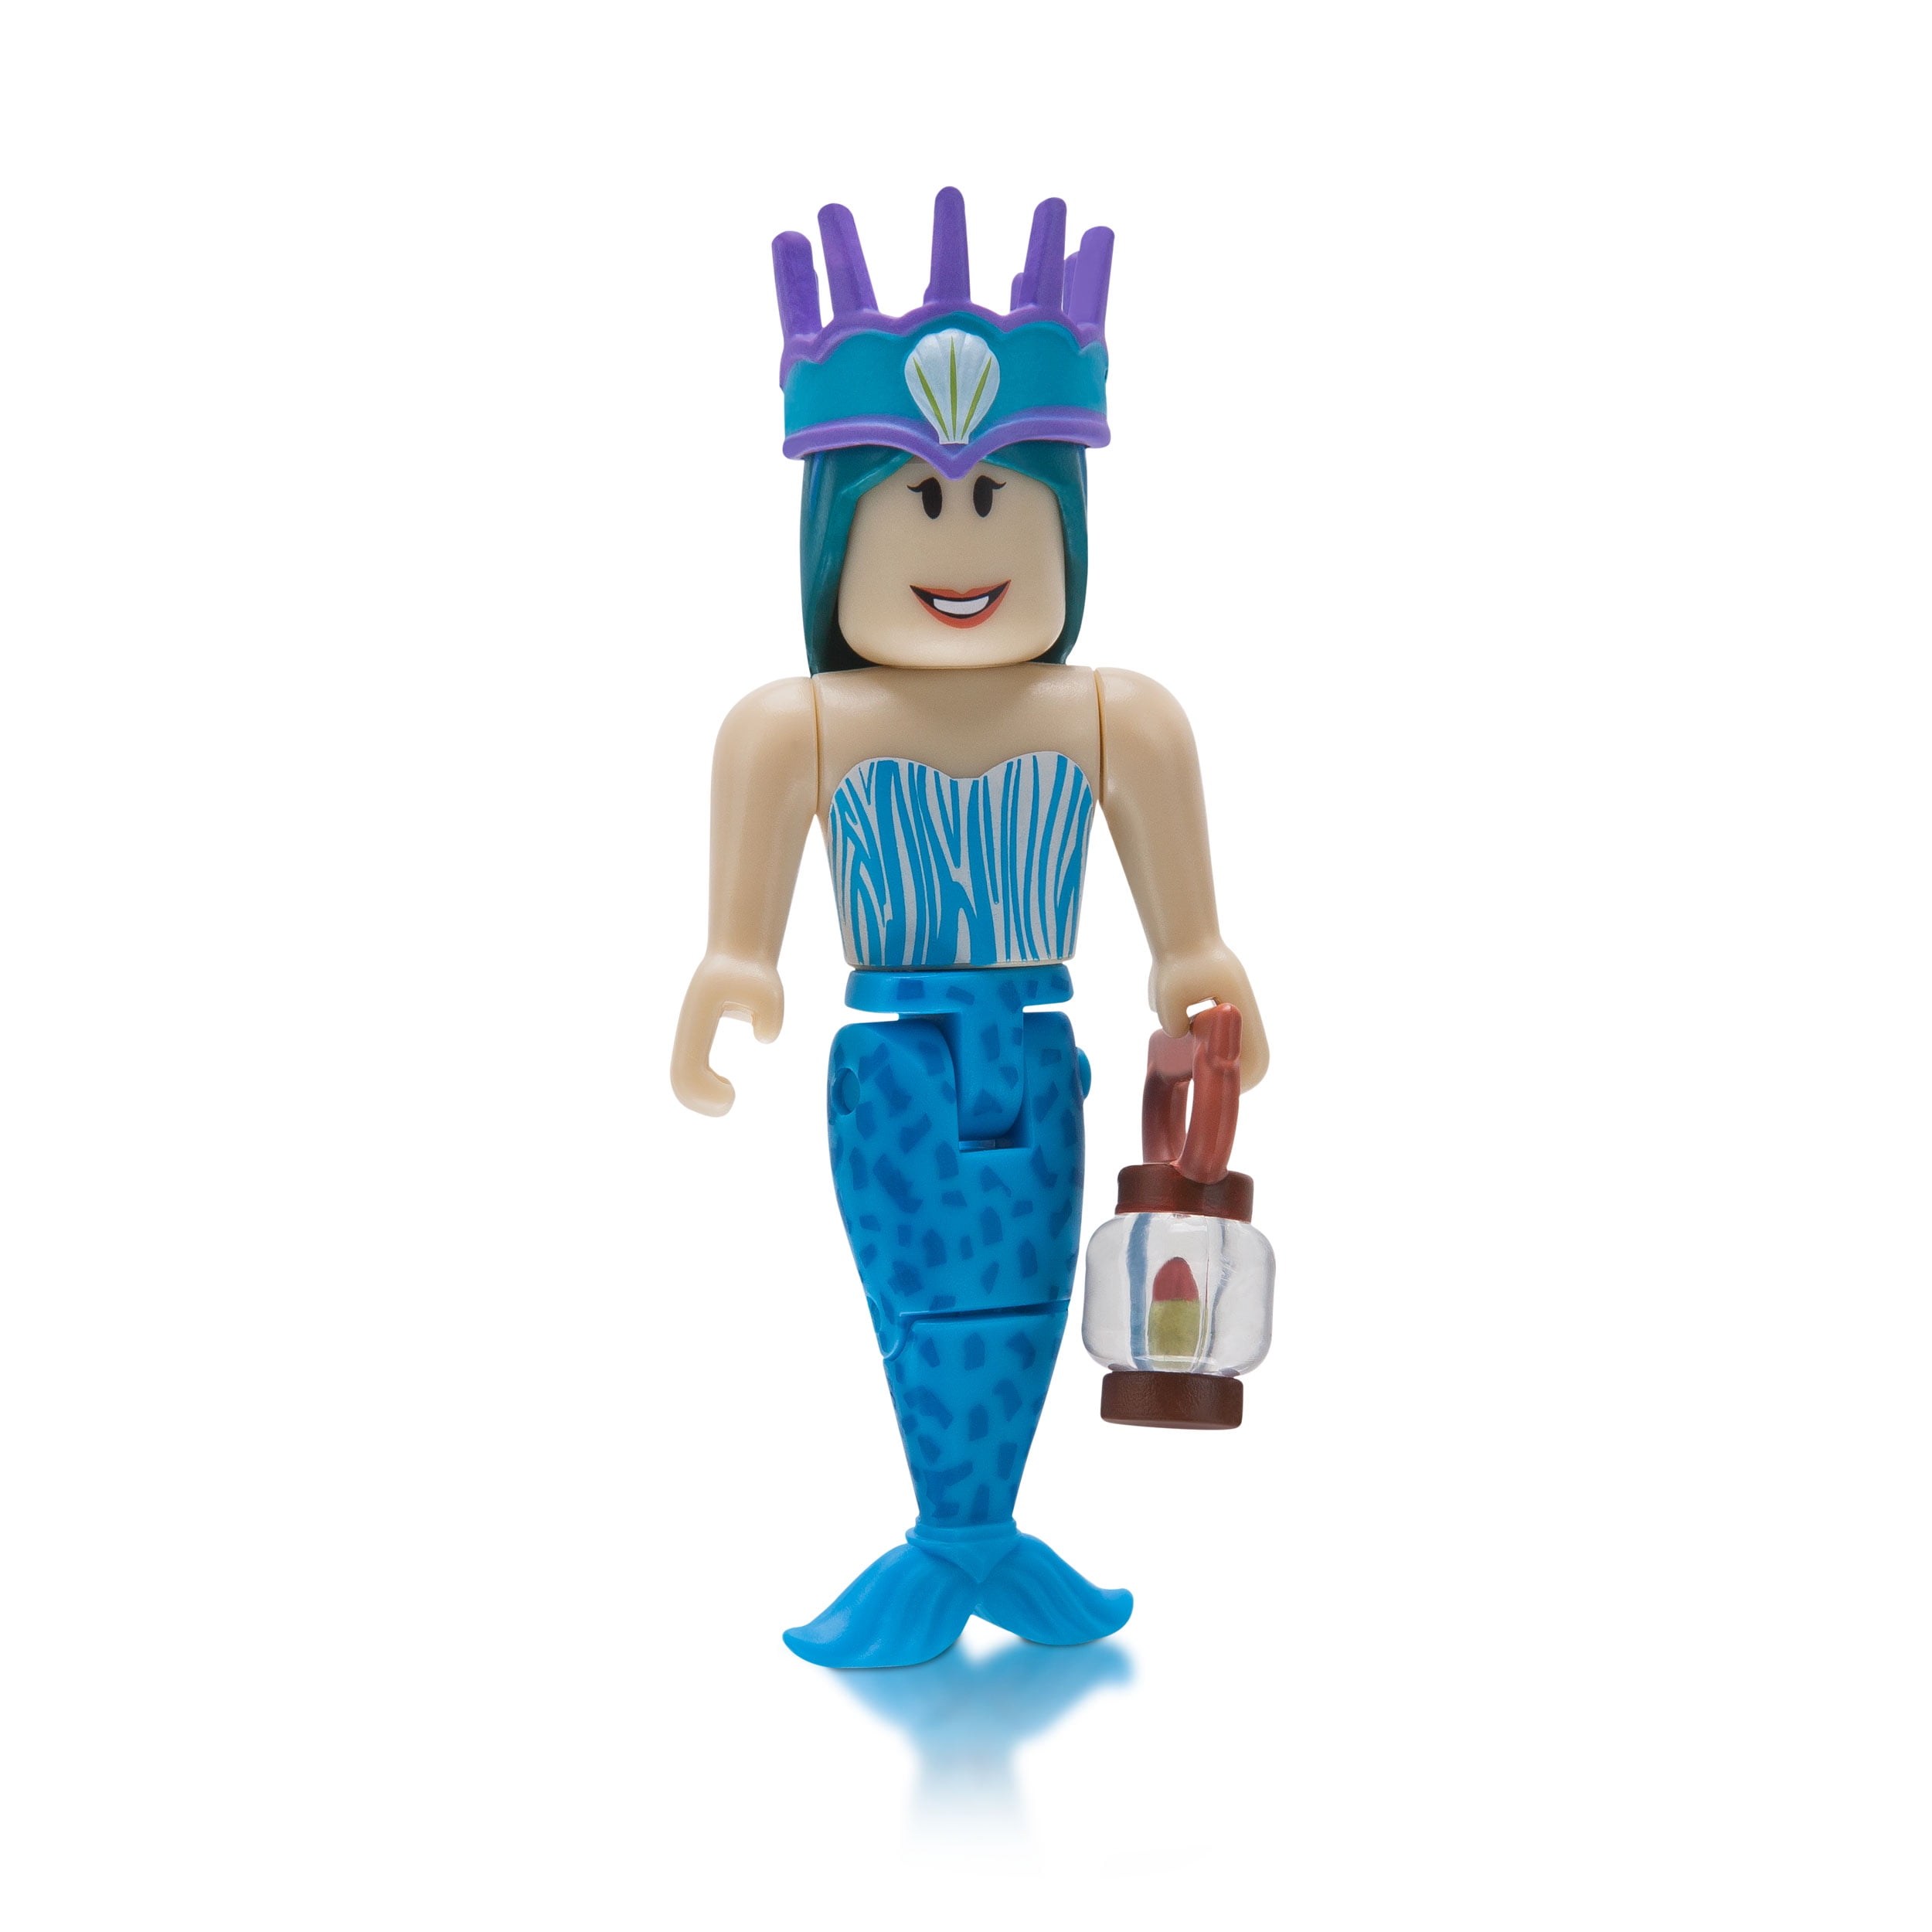 Roblox Celebrity Collection Neverland Lagoon Crown Collector Figure Pack Includes Exclusive Virtual Item Walmart Com Walmart Com - roblox celebrity neverland lagoon figure multipack adg toys